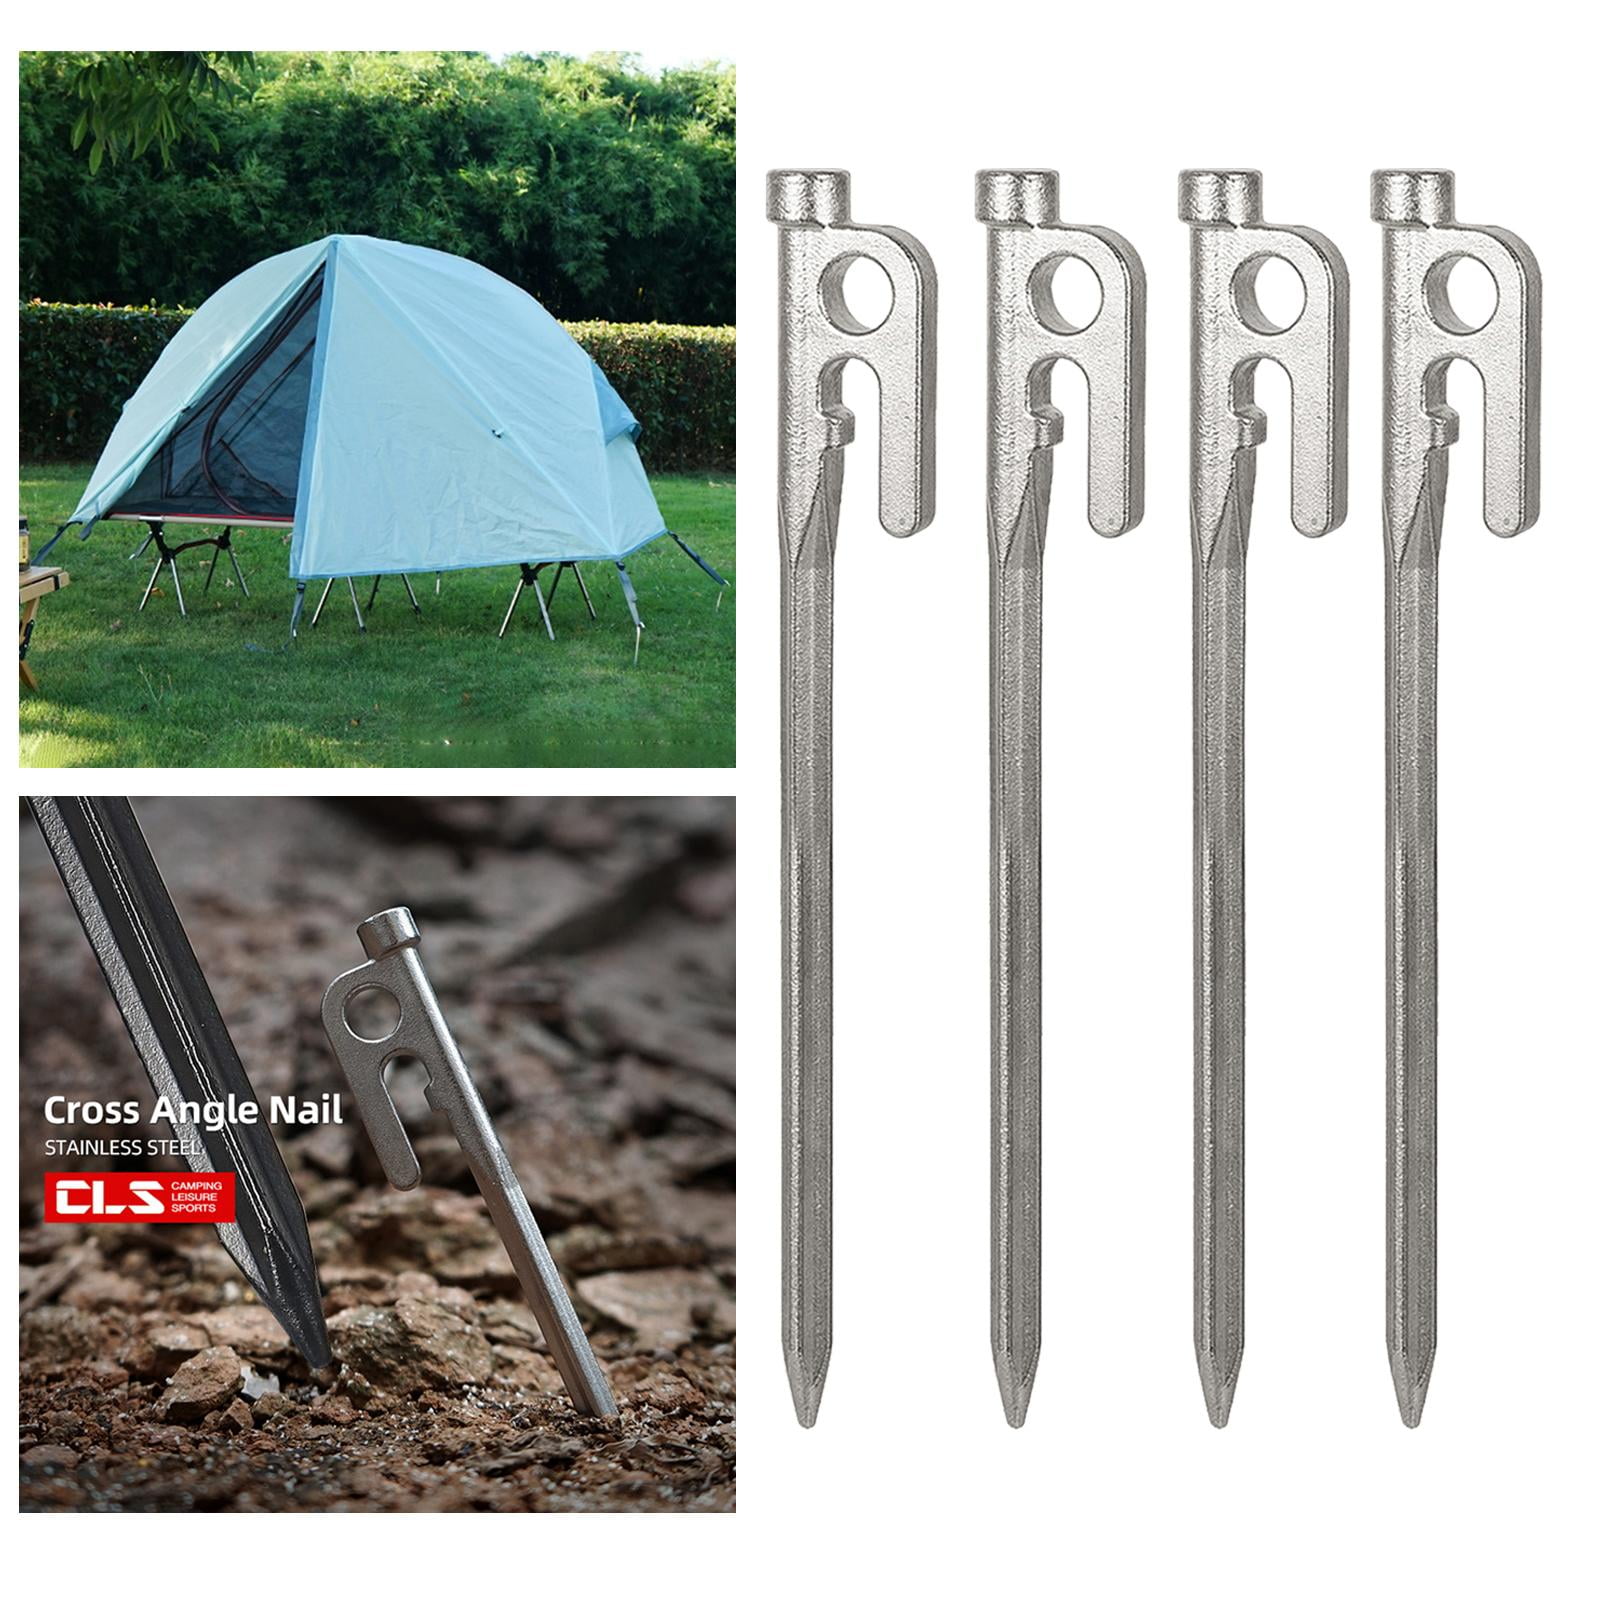 10 X HEAVY DUTY GALVANISED STEEL TENT PEGS METAL CAMPING CANOPY HIGH QUALITY NEW 